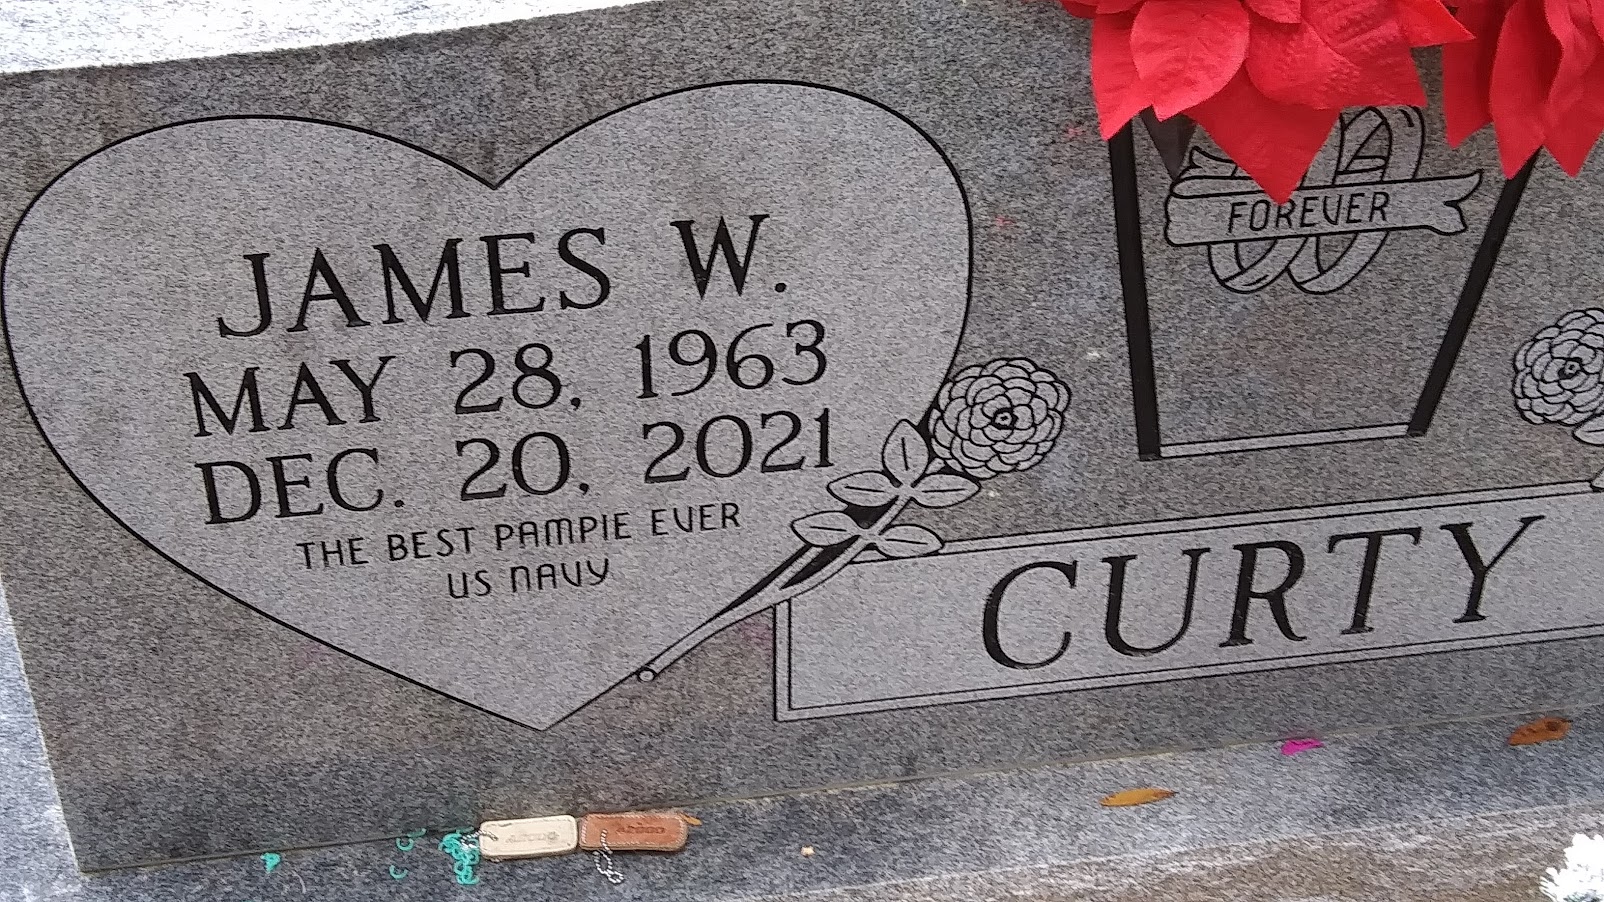 Headstone for Curty, James W